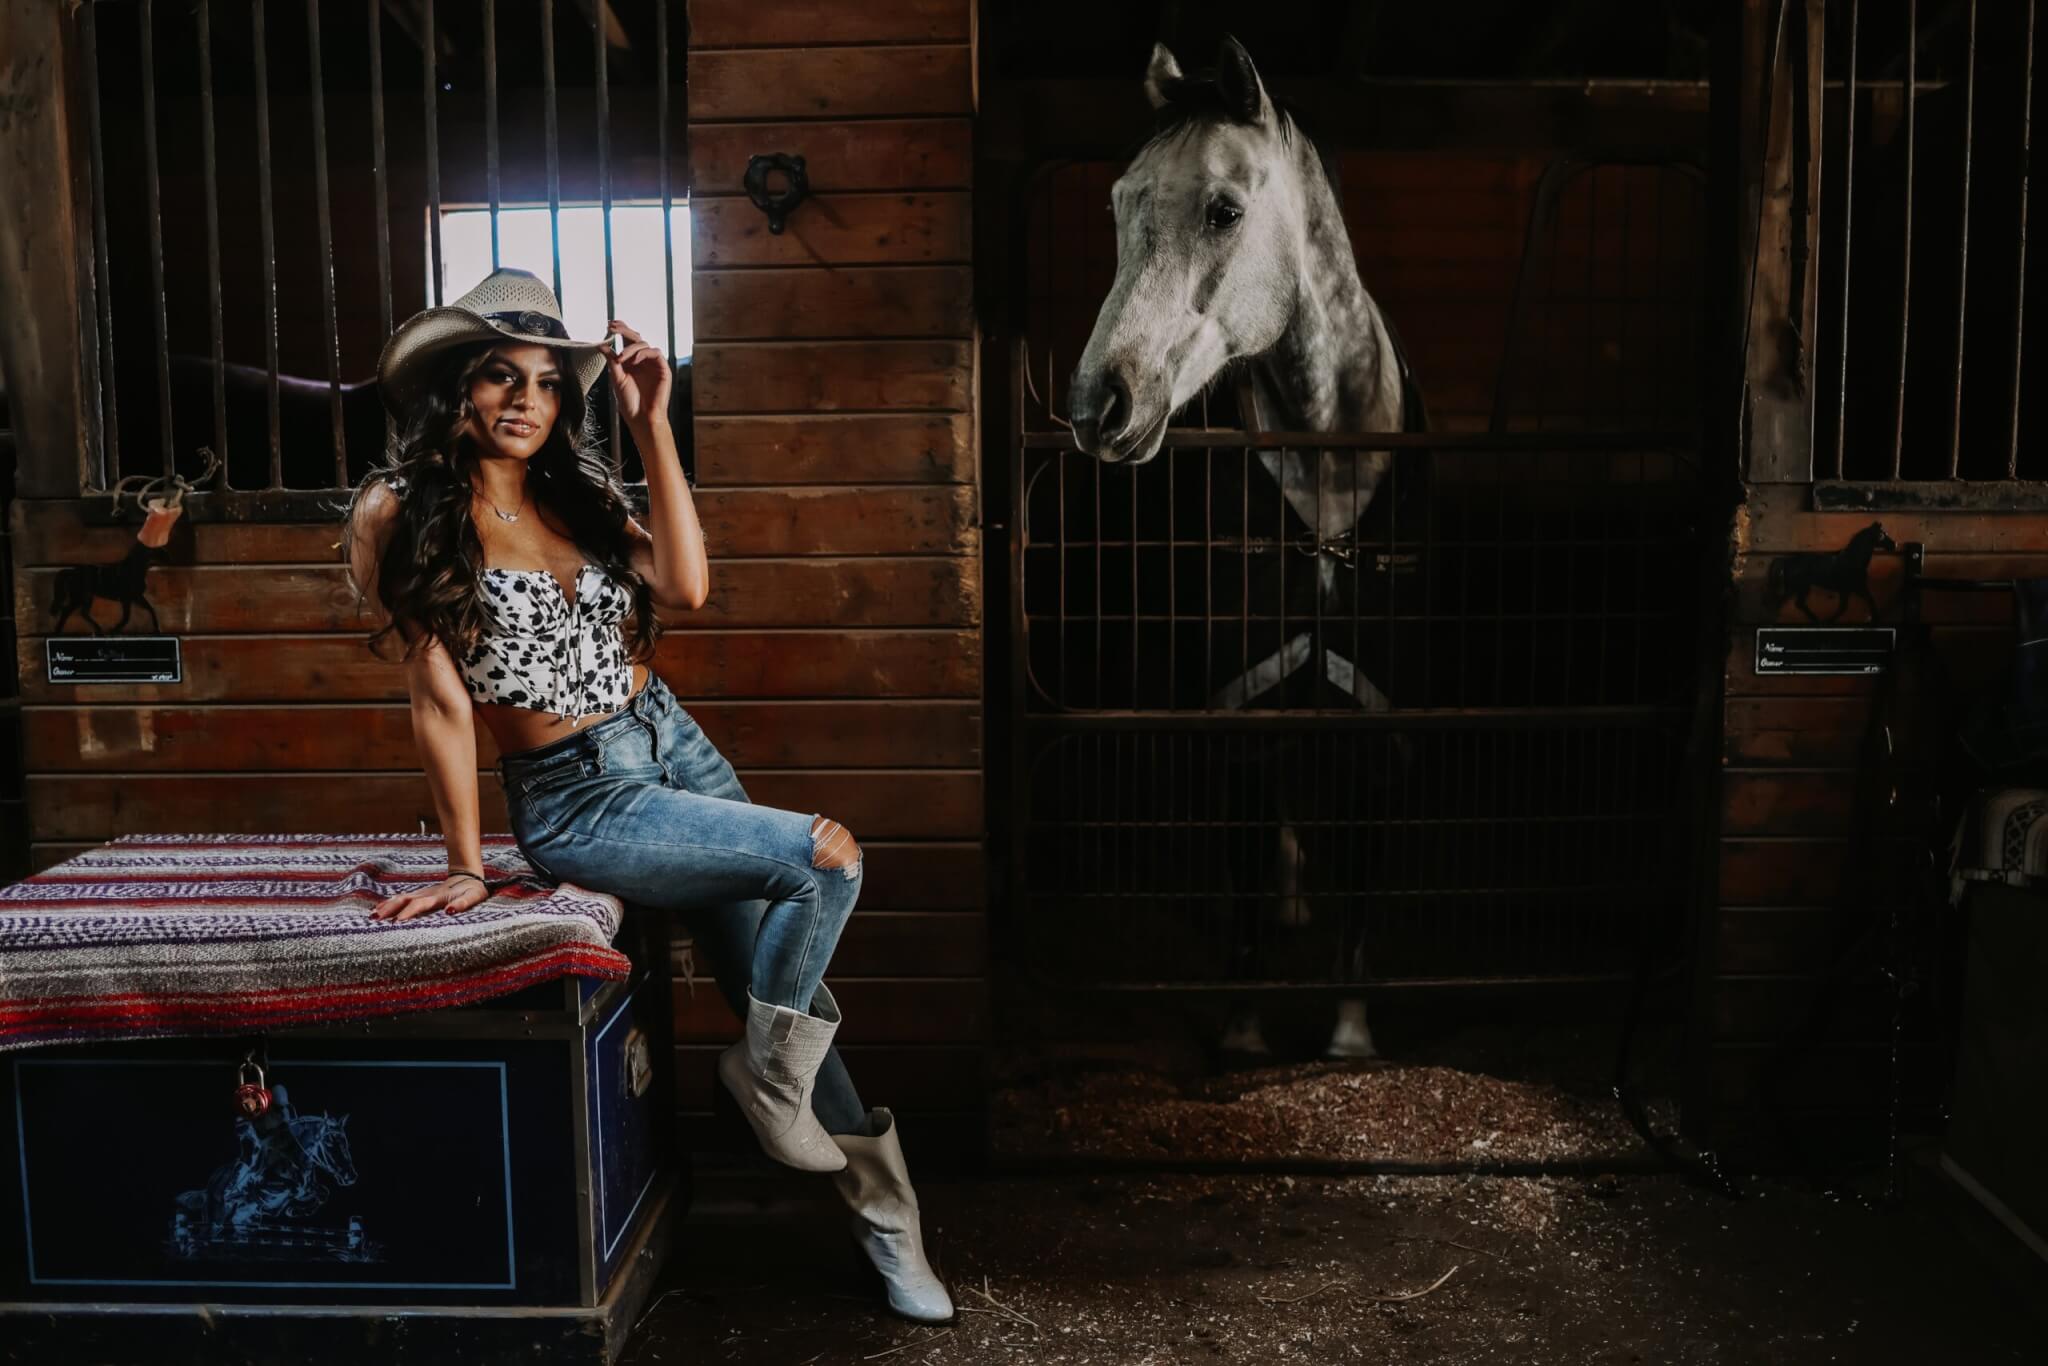 “This is truly an out-of-the-box opportunity”: Saddle up for The Barn – an Alli Murphy Photography Experience